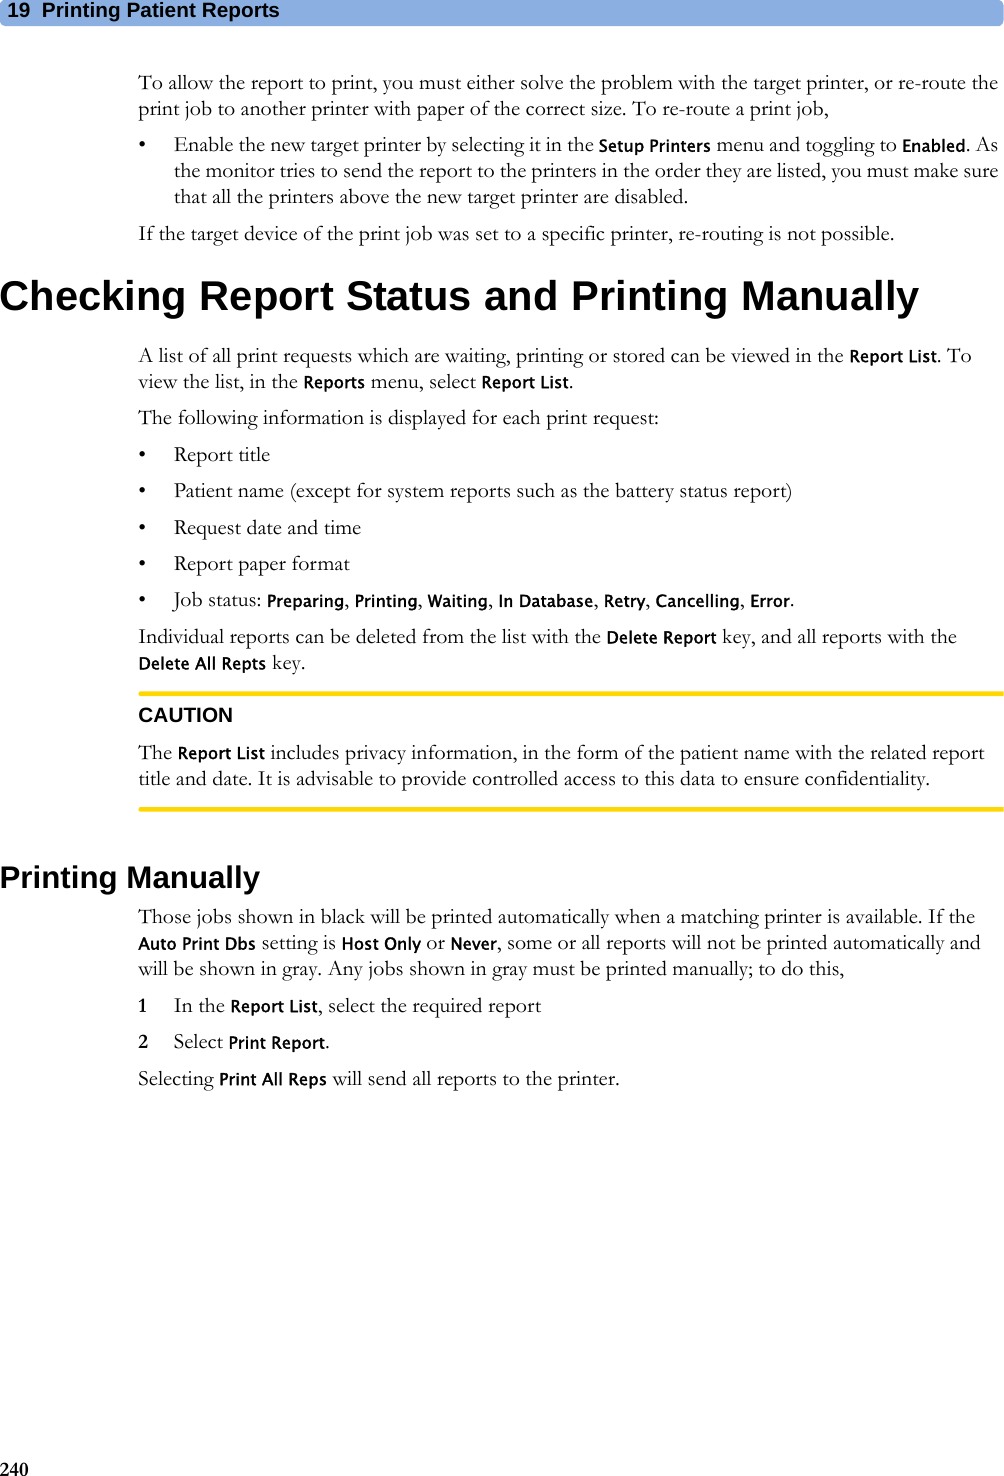 19 Printing Patient Reports240To allow the report to print, you must either solve the problem with the target printer, or re-route the print job to another printer with paper of the correct size. To re-route a print job,• Enable the new target printer by selecting it in the Setup Printers menu and toggling to Enabled. As the monitor tries to send the report to the printers in the order they are listed, you must make sure that all the printers above the new target printer are disabled.If the target device of the print job was set to a specific printer, re-routing is not possible.Checking Report Status and Printing ManuallyA list of all print requests which are waiting, printing or stored can be viewed in the Report List. To view the list, in the Reports menu, select Report List.The following information is displayed for each print request:• Report title• Patient name (except for system reports such as the battery status report)• Request date and time• Report paper format•Job status: Preparing, Printing, Waiting, In Database, Retry, Cancelling, Error.Individual reports can be deleted from the list with the Delete Report key, and all reports with the Delete All Repts key.CAUTIONThe Report List includes privacy information, in the form of the patient name with the related report title and date. It is advisable to provide controlled access to this data to ensure confidentiality.Printing ManuallyThose jobs shown in black will be printed automatically when a matching printer is available. If the Auto Print Dbs setting is Host Only or Never, some or all reports will not be printed automatically and will be shown in gray. Any jobs shown in gray must be printed manually; to do this,1In the Report List, select the required report2Select Print Report.Selecting Print All Reps will send all reports to the printer.